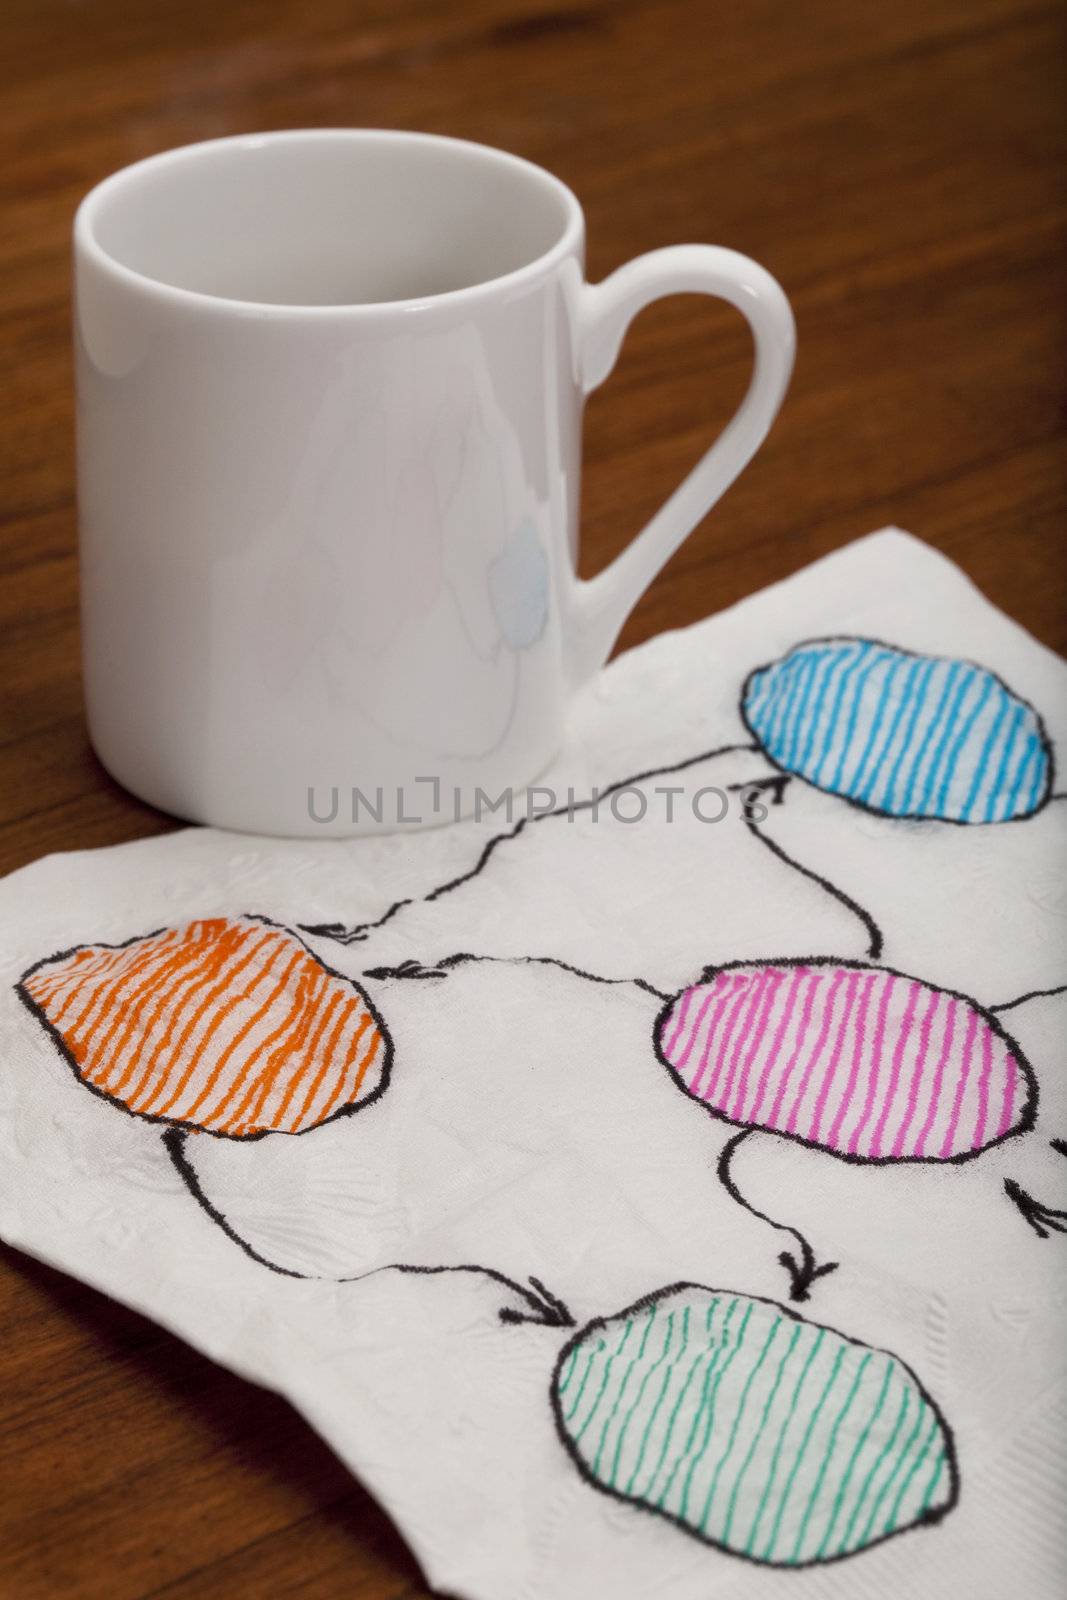 abstract flowchart or mind map - napkin doodle with espresso coffee cup on old wooden table